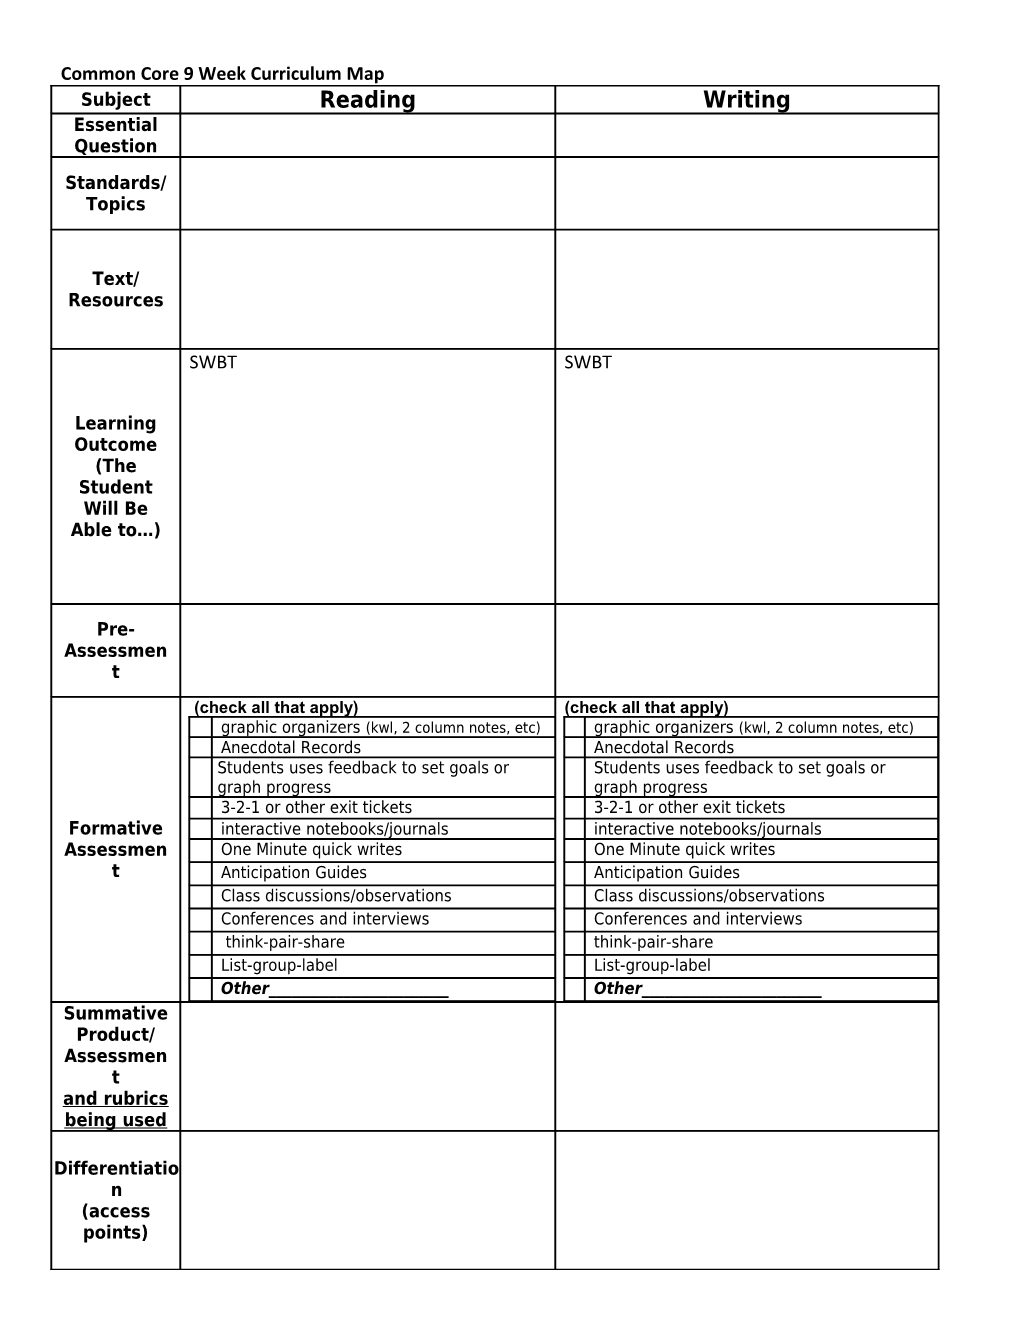 Common Core 9 Week Curriculum Map